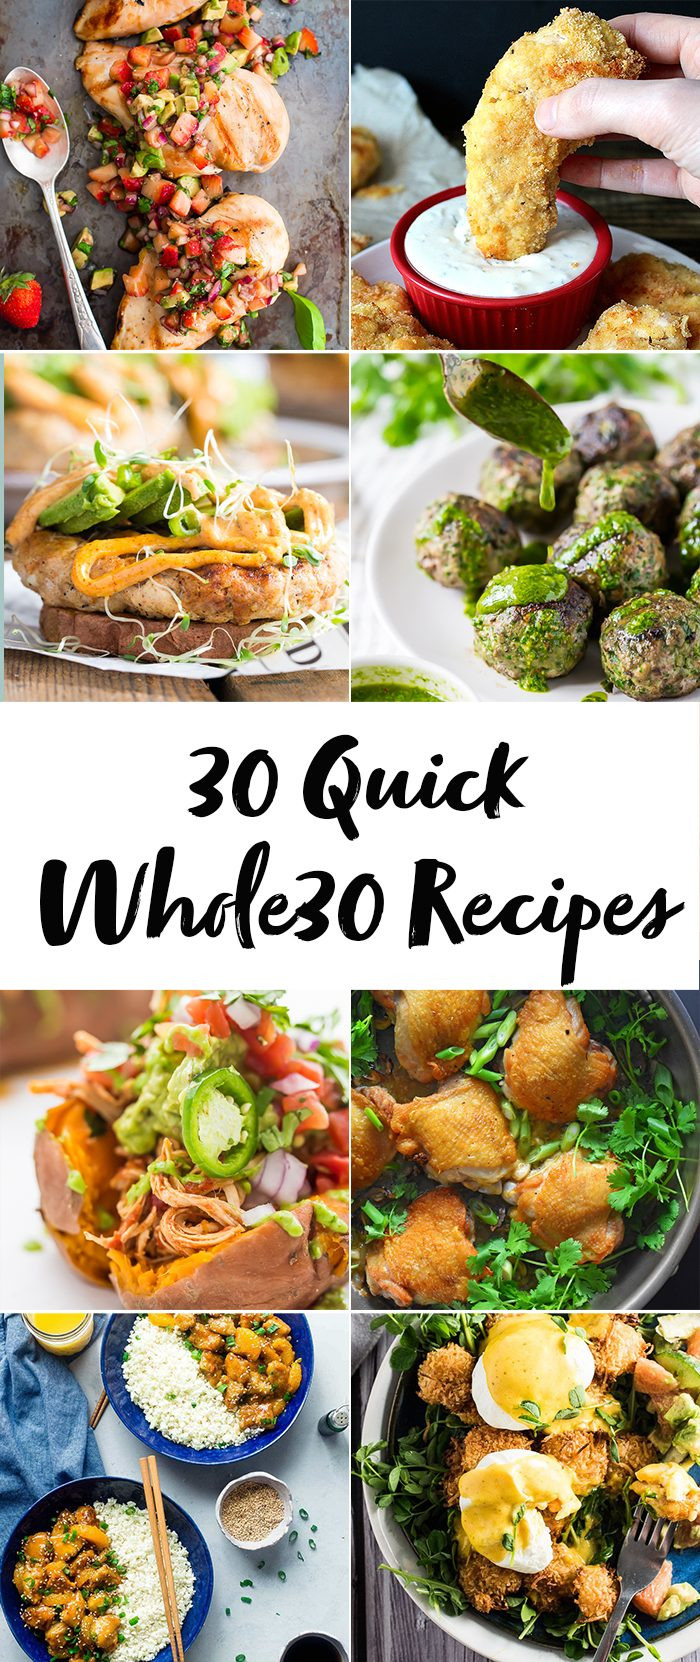 Quick Whole 30 Dinners
 30 Quick Whole30 Recipes Whole30 Dinner Recipes